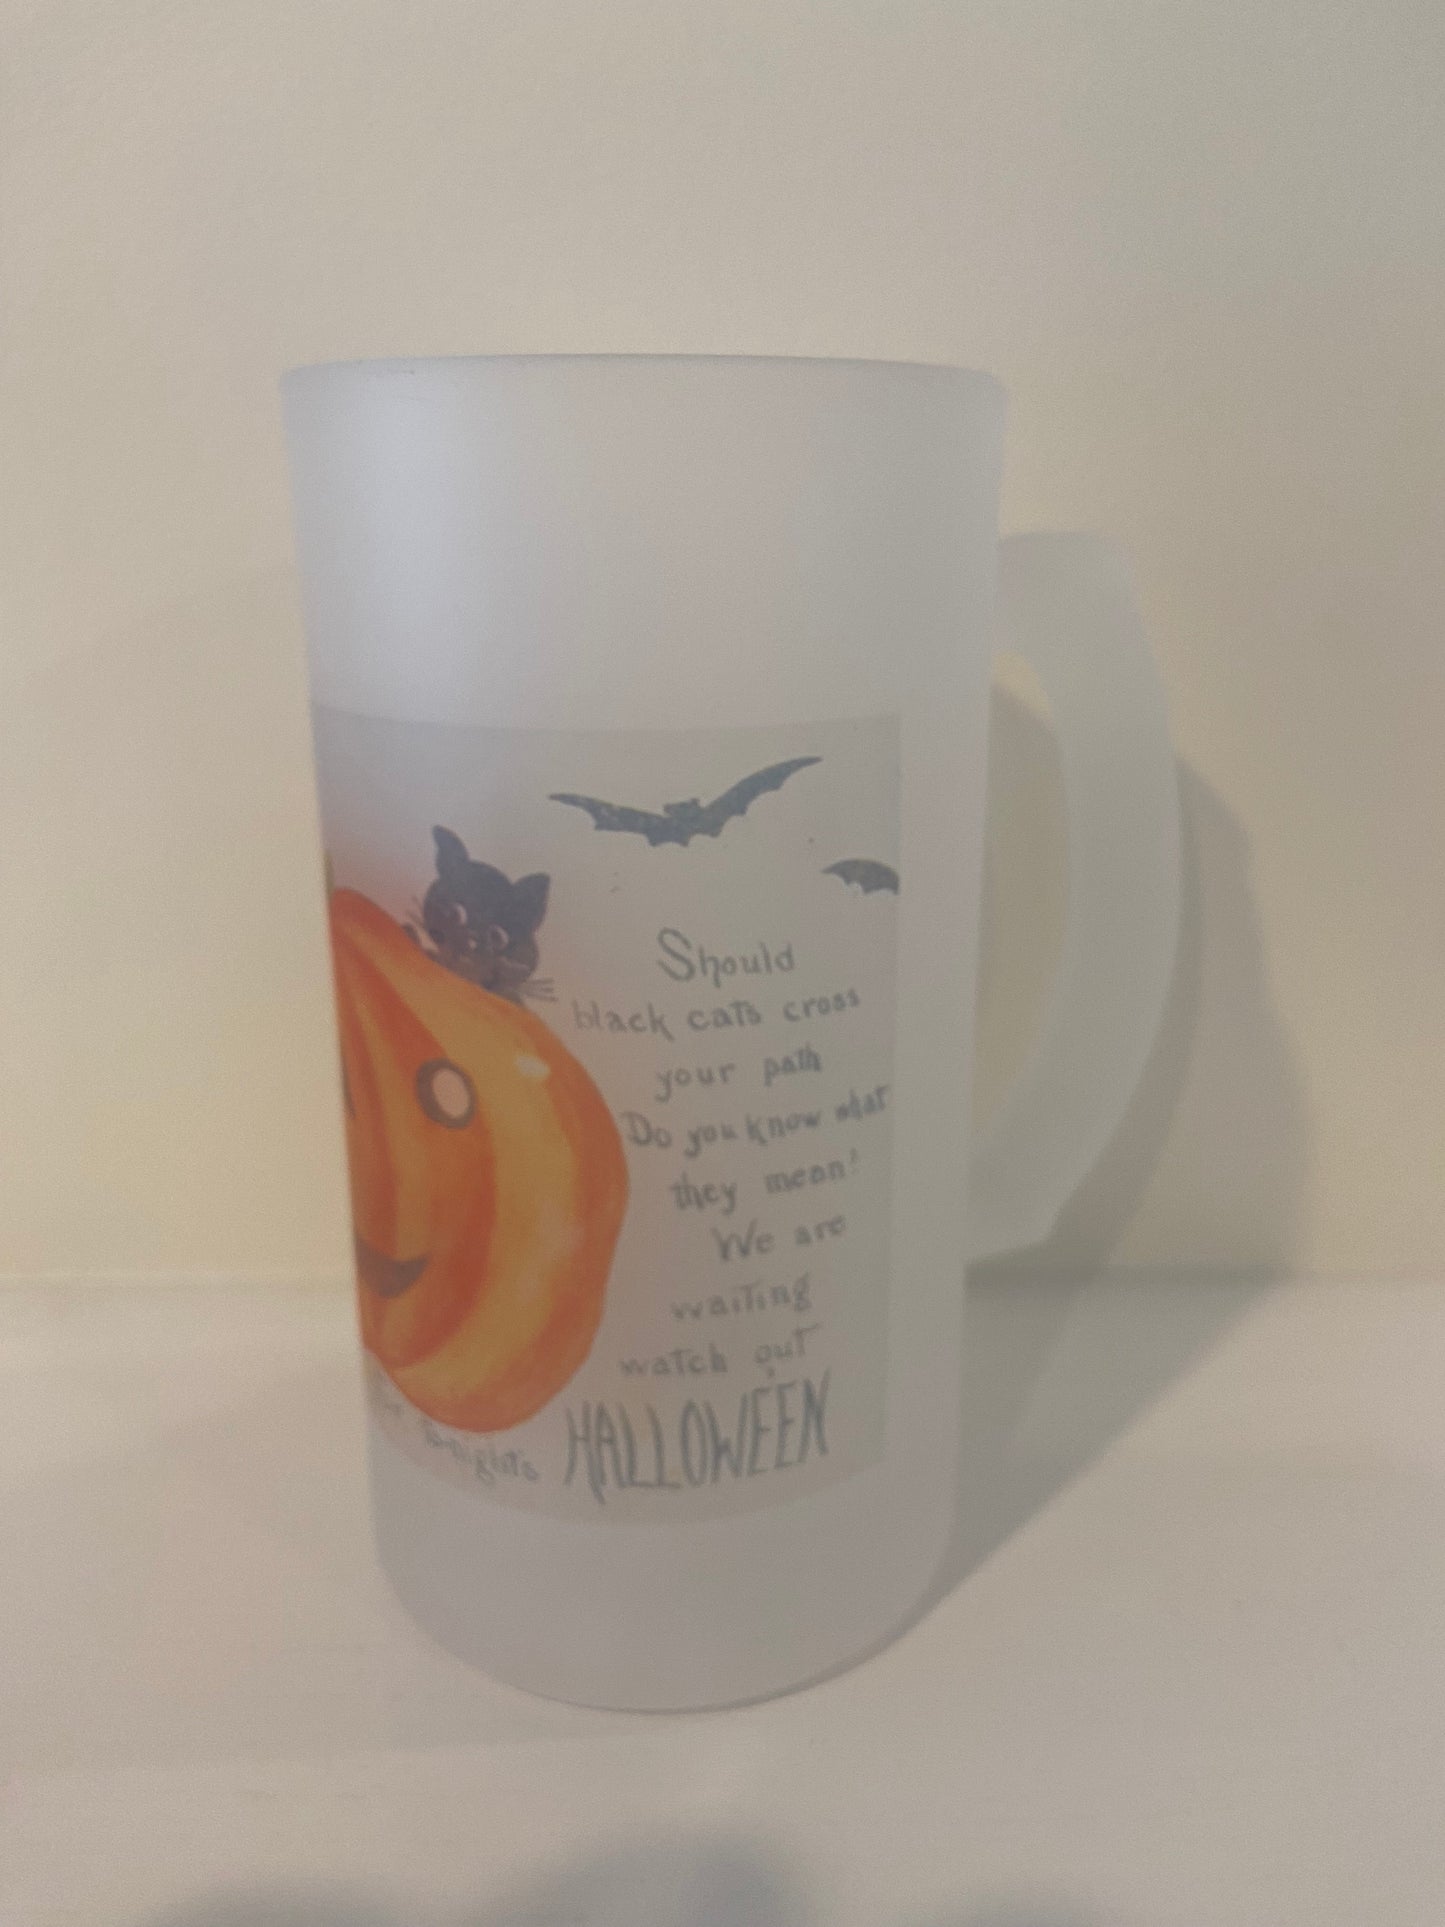 Jack O' Lantern Frosted Glass Beer Mug Created From Archival Postcard